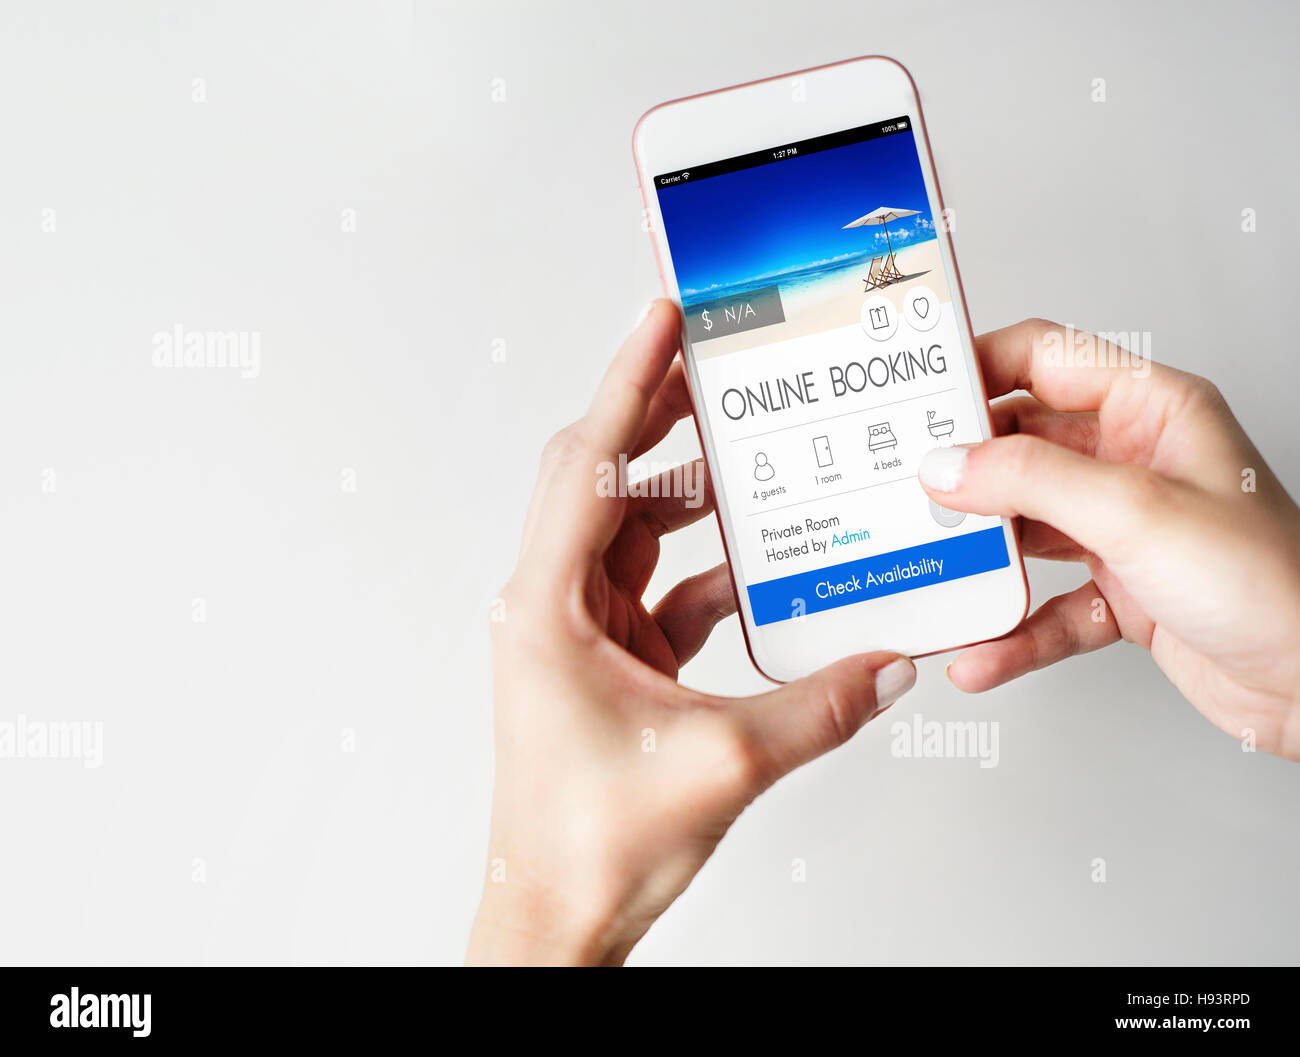 Booking Ticket Online Reservation Travel Flight Concept Stock Photo